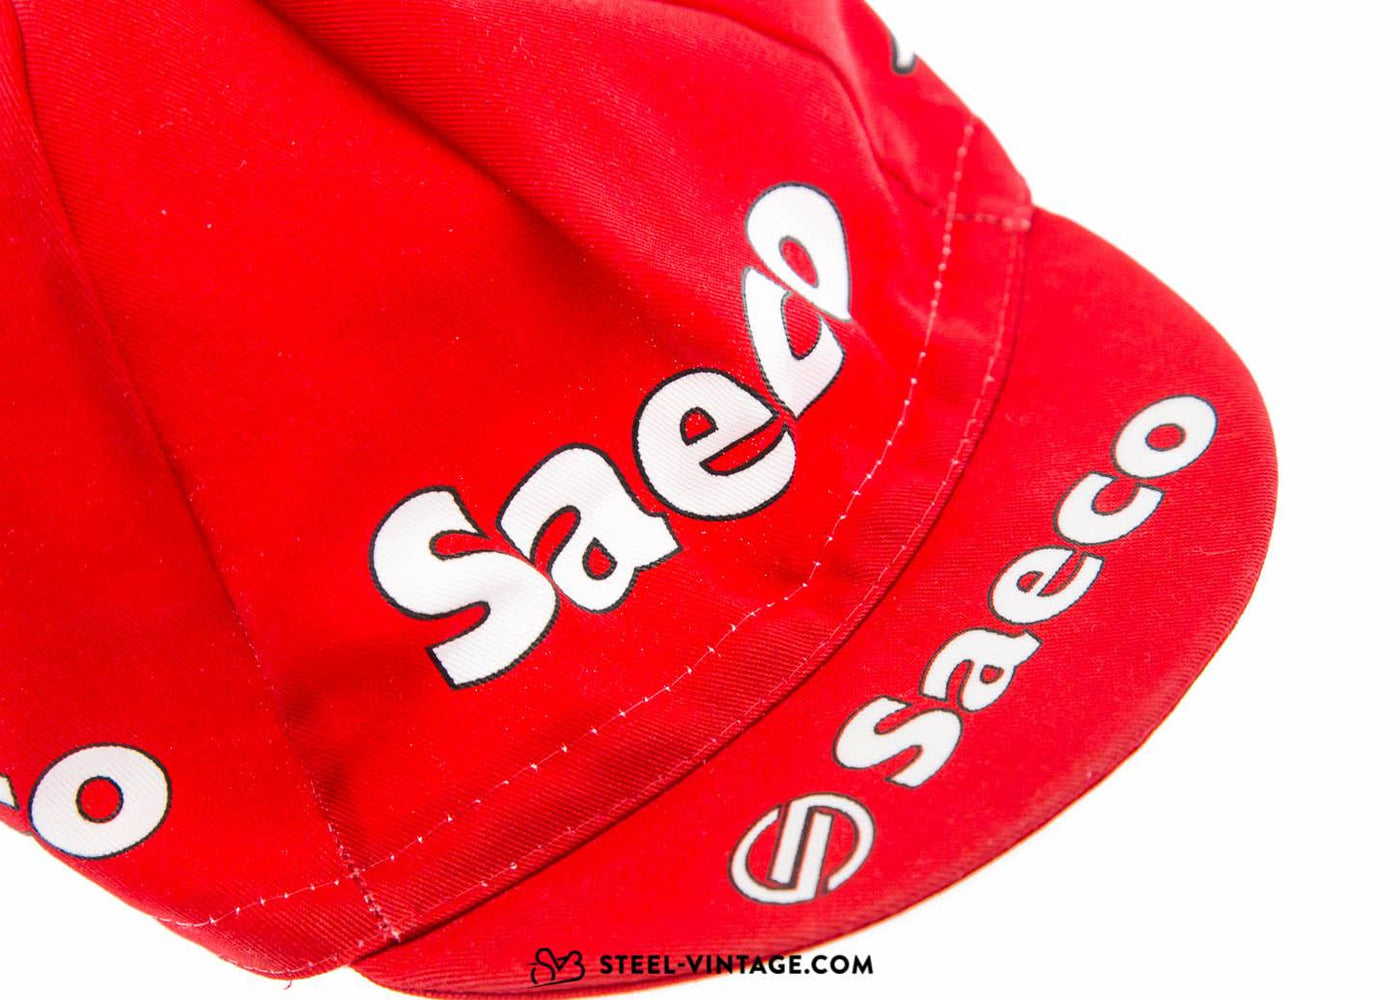 Team Saeco Cannondale Cycling Cap - Steel Vintage Bikes